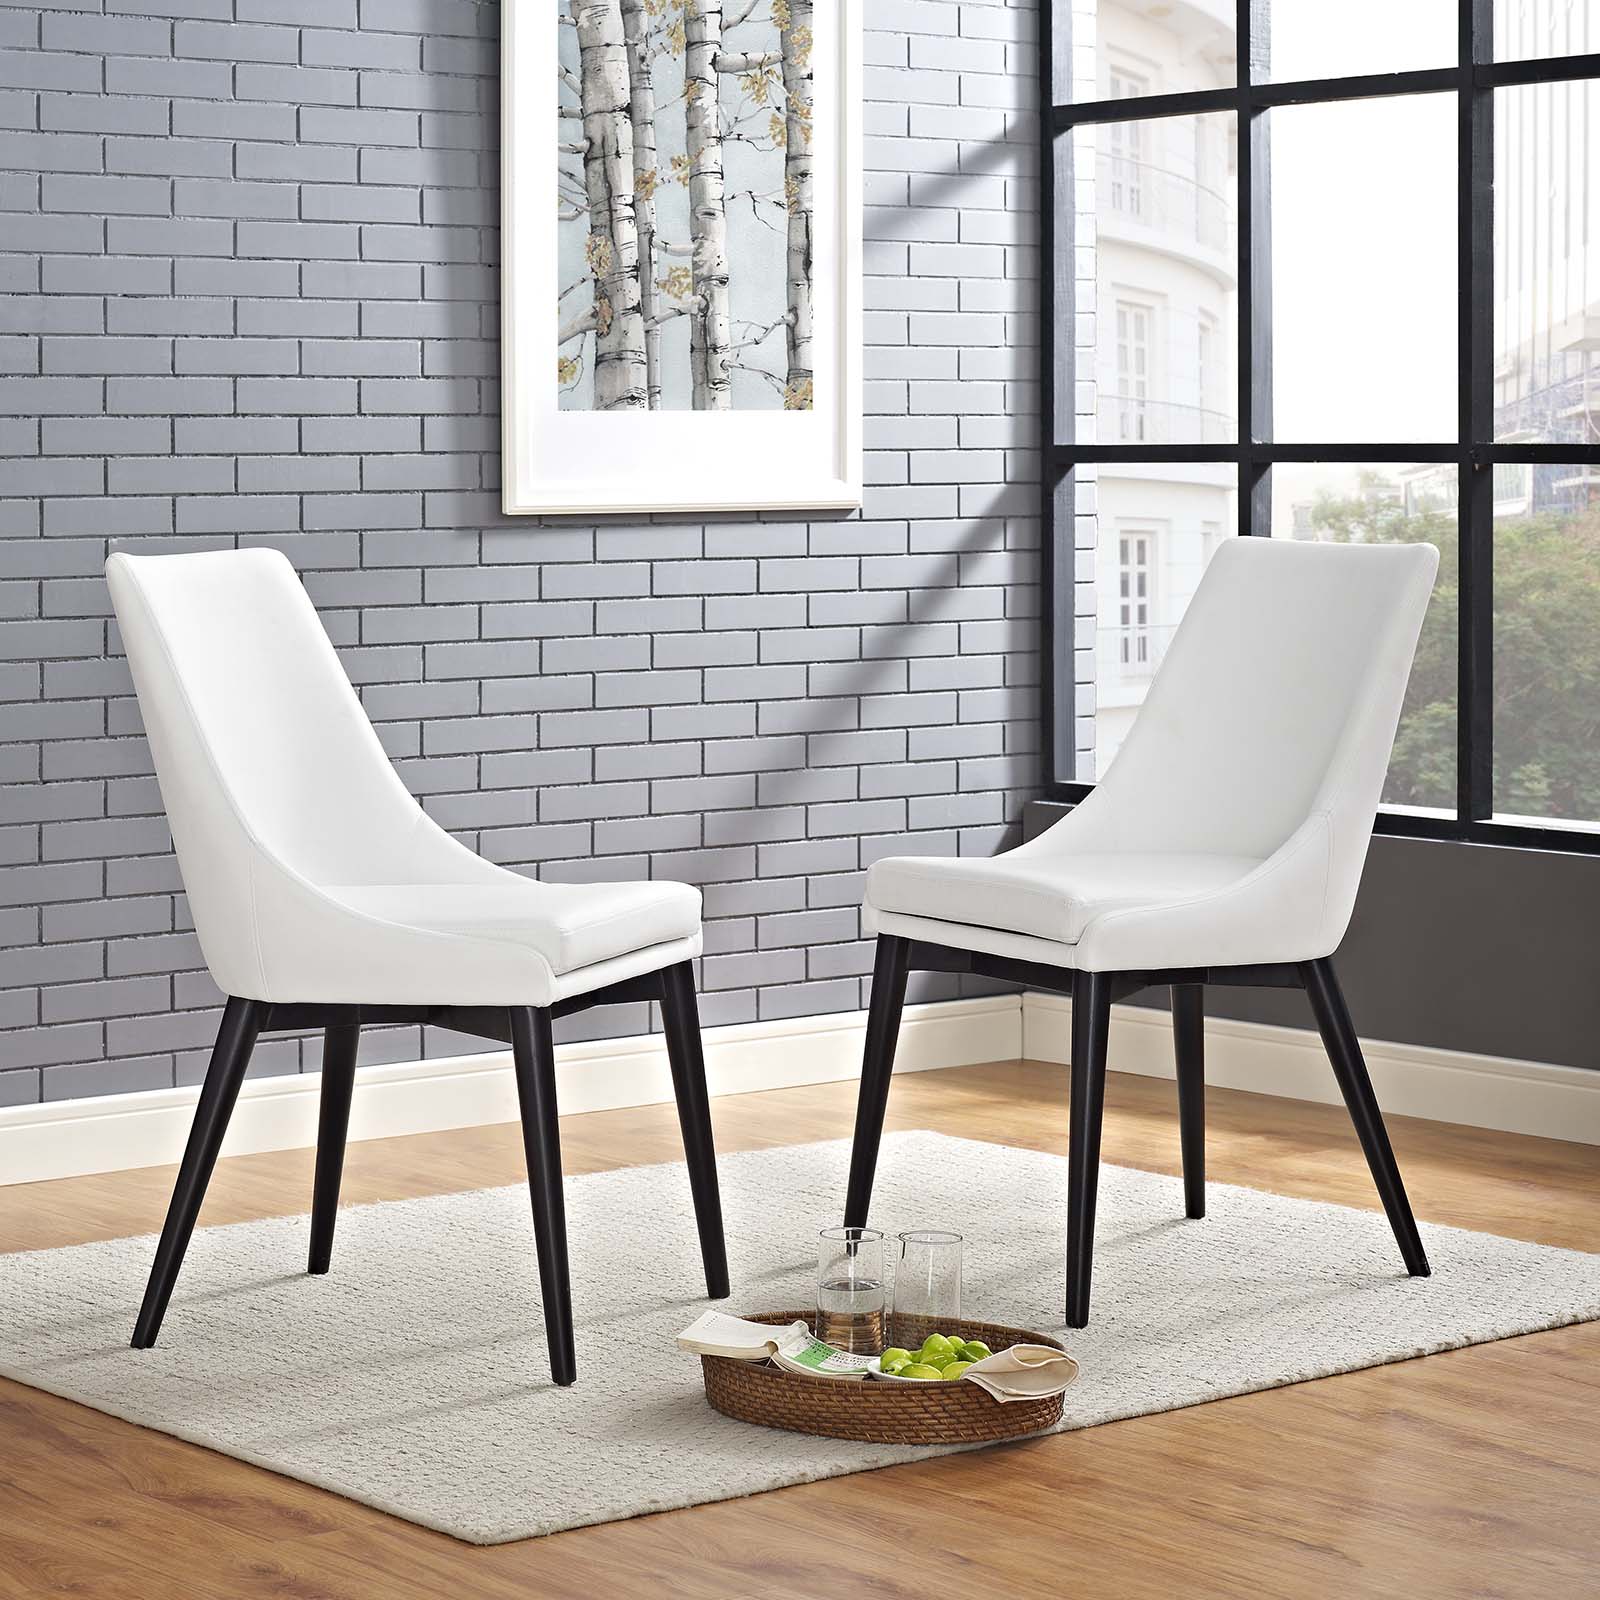 Viscount Dining Side Chair Vinyl  White (Set of 2)